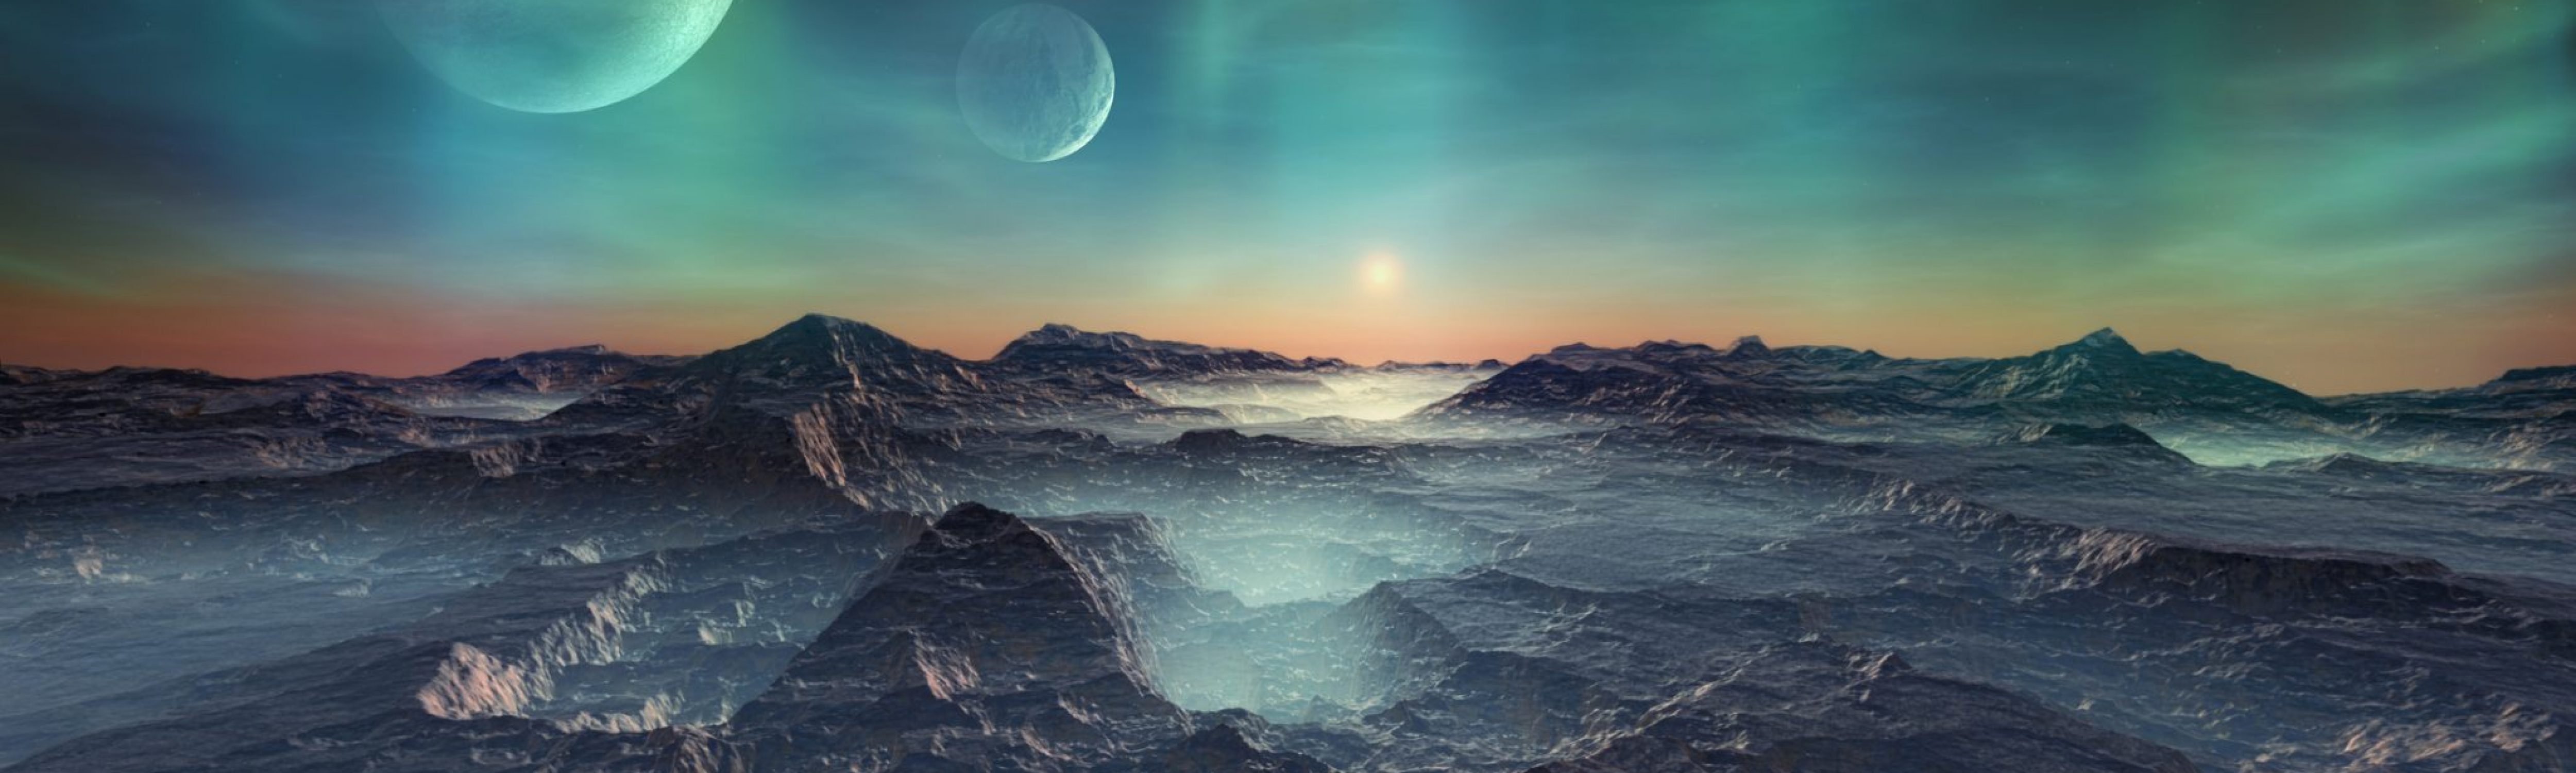 A dark Sci-fi landscape of mountains on an unknown world with two moons on a night horizon symbolises brave new worlds.